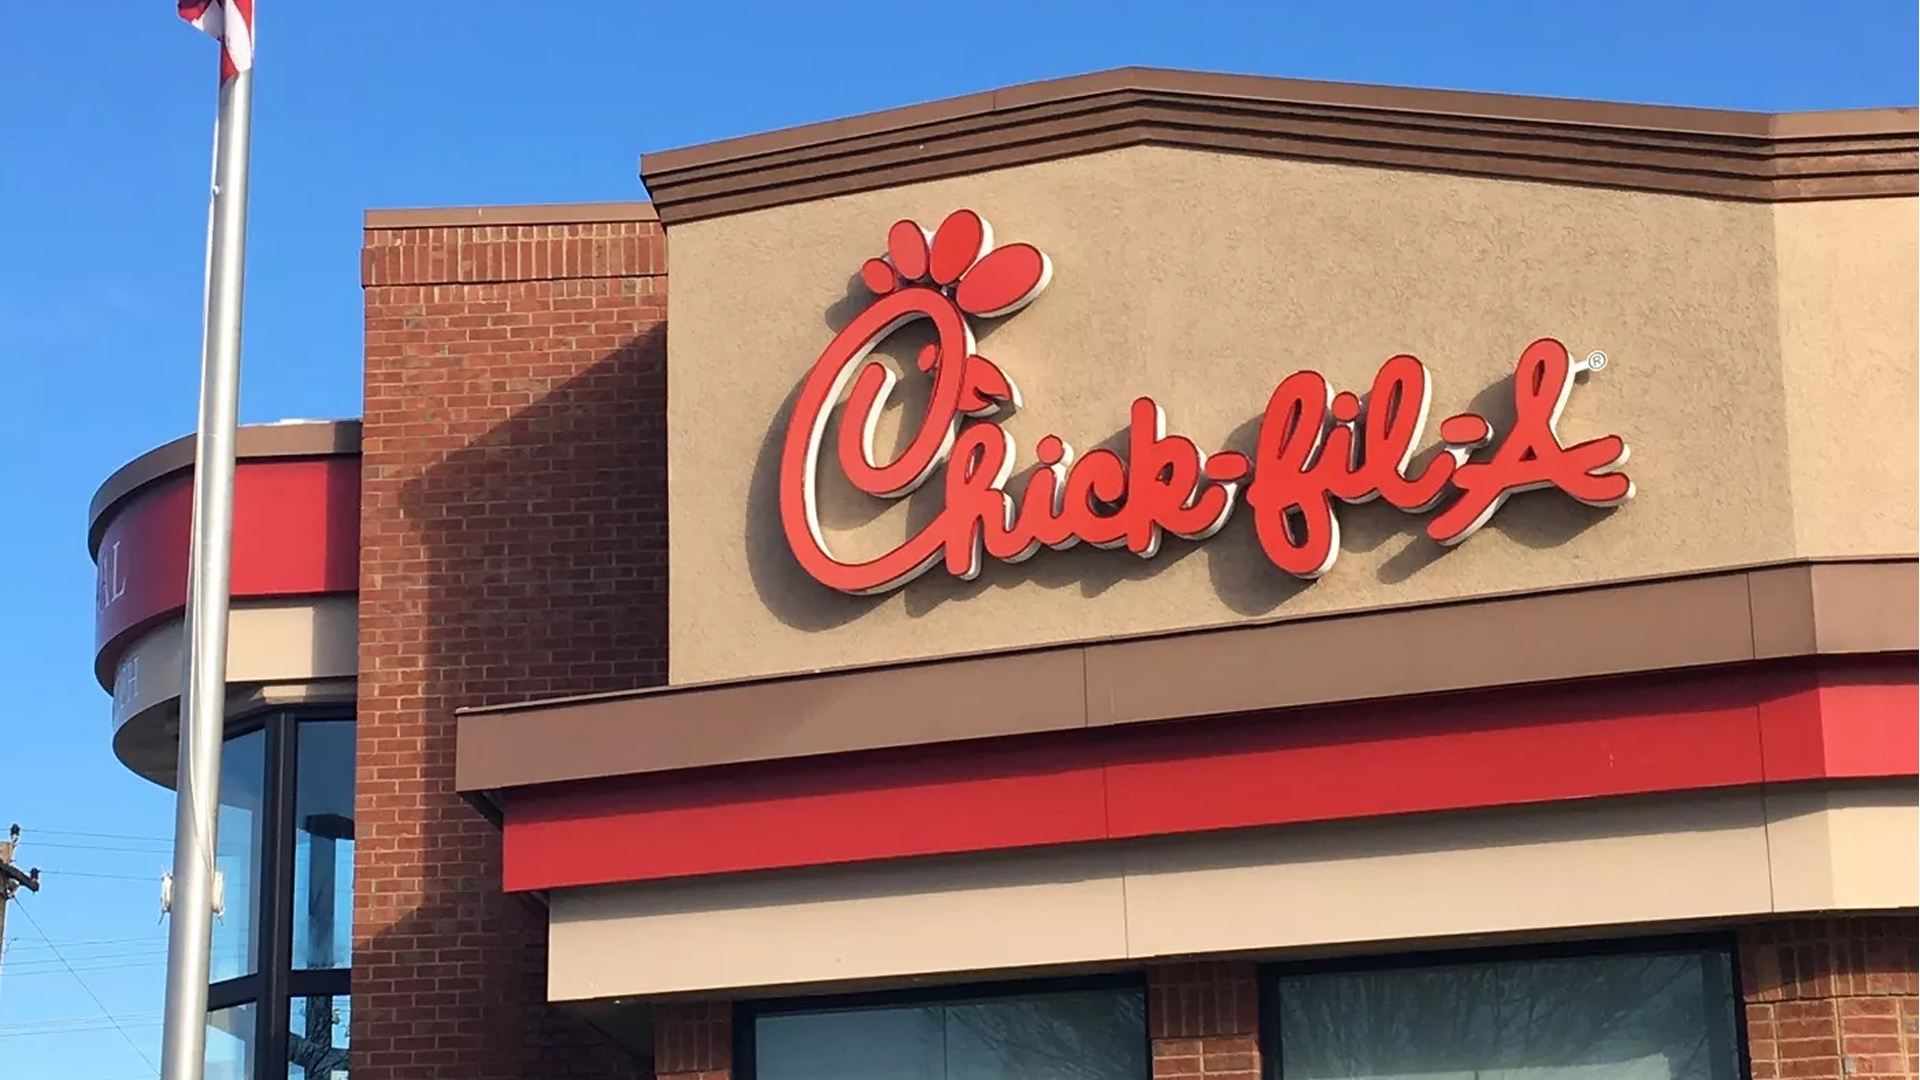 Marines Step Up to Stop Stabbing at Chick-fil-A and Destroy Knife...